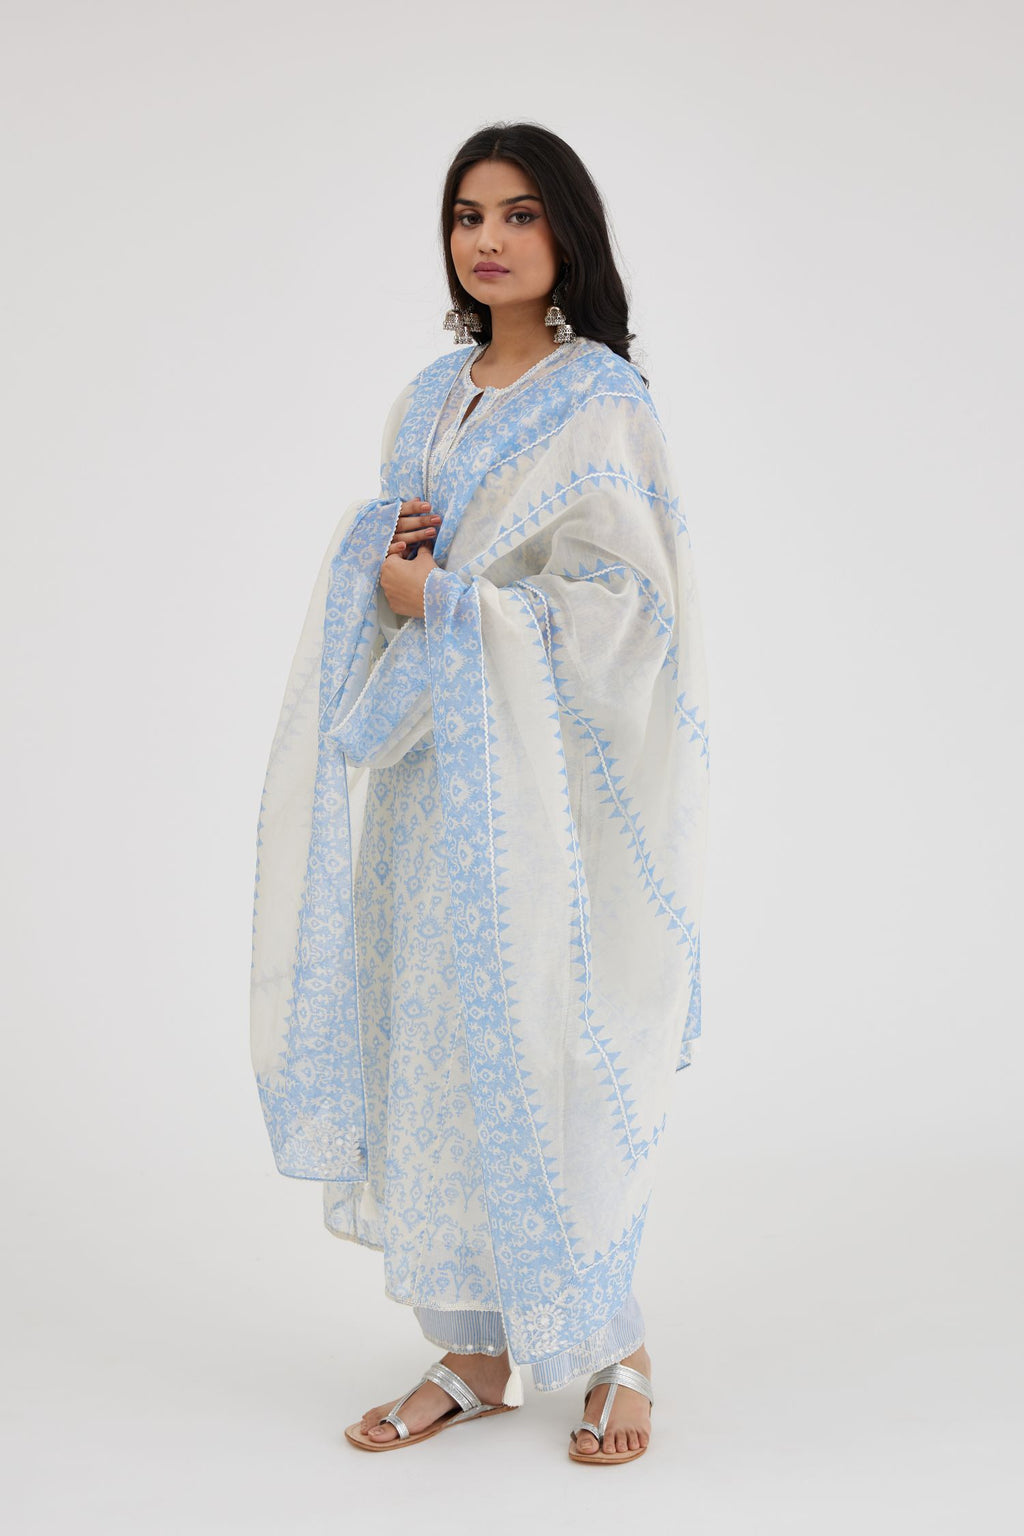 Ikat design blue and off white hand block-printed Cotton Chanderi straight long kurta set with round neck and front button placket.